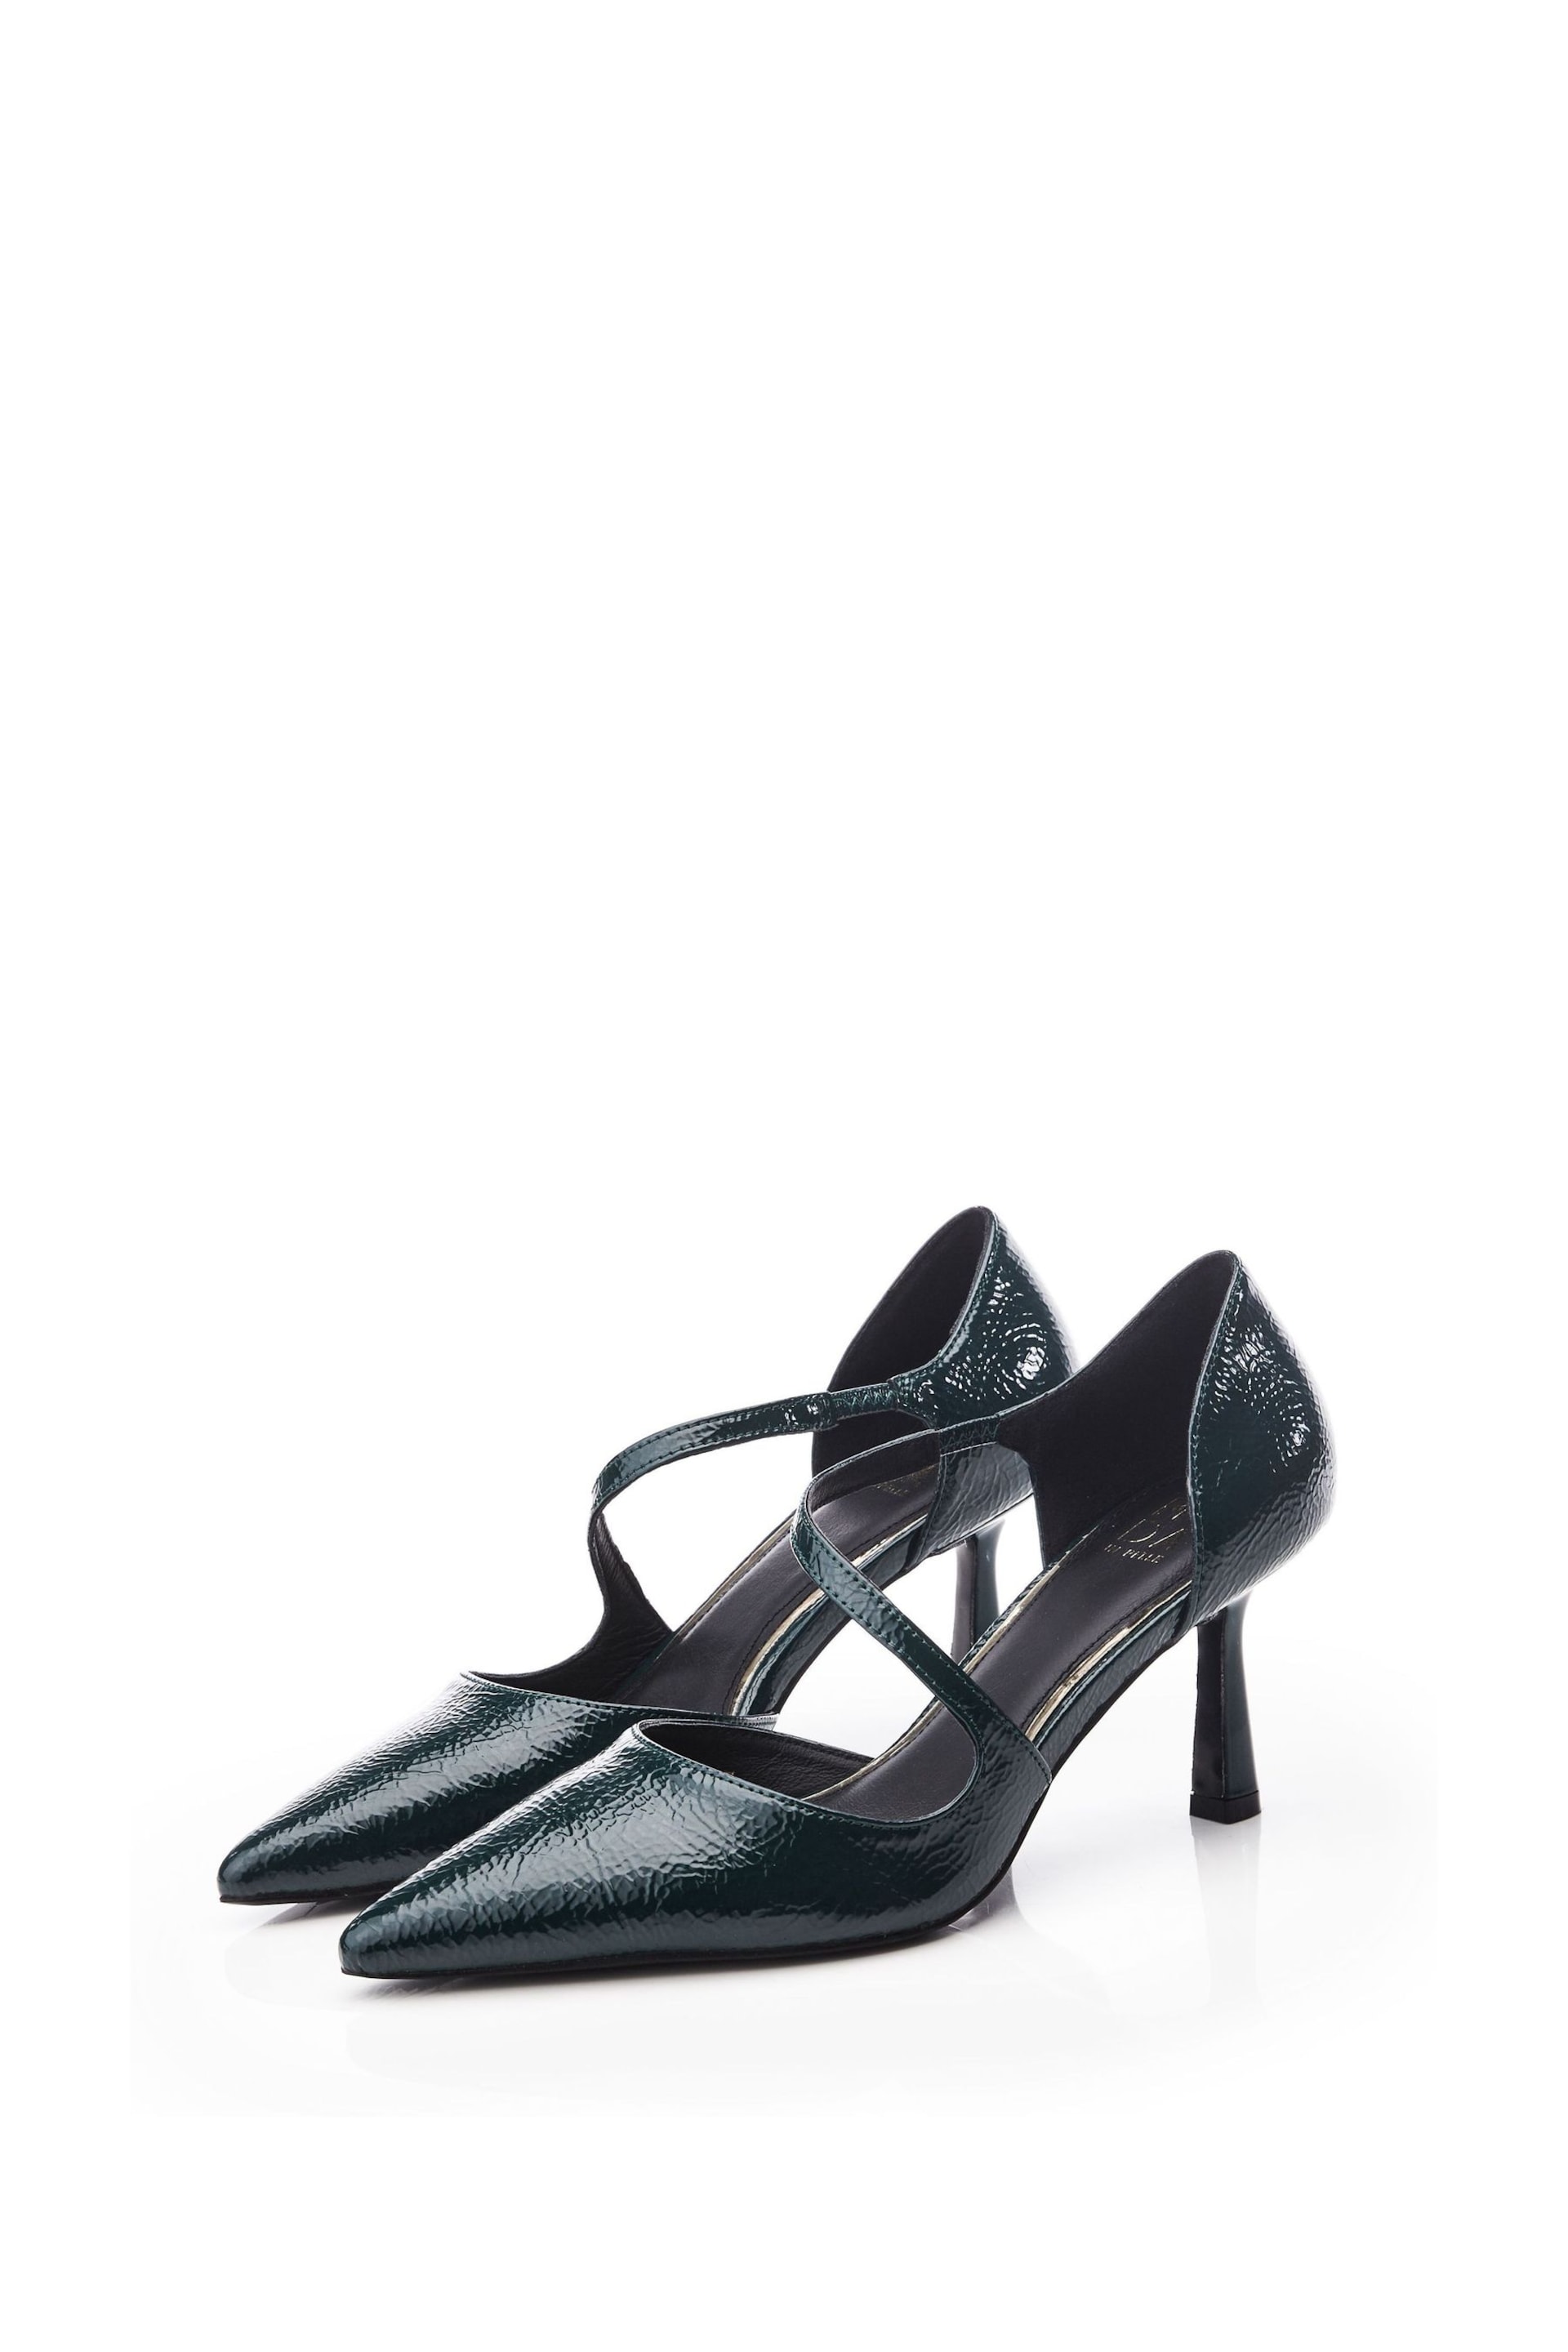 Moda in Pelle Daleiza Heeled Pointed Crossover Court Black Shoes - Image 2 of 4